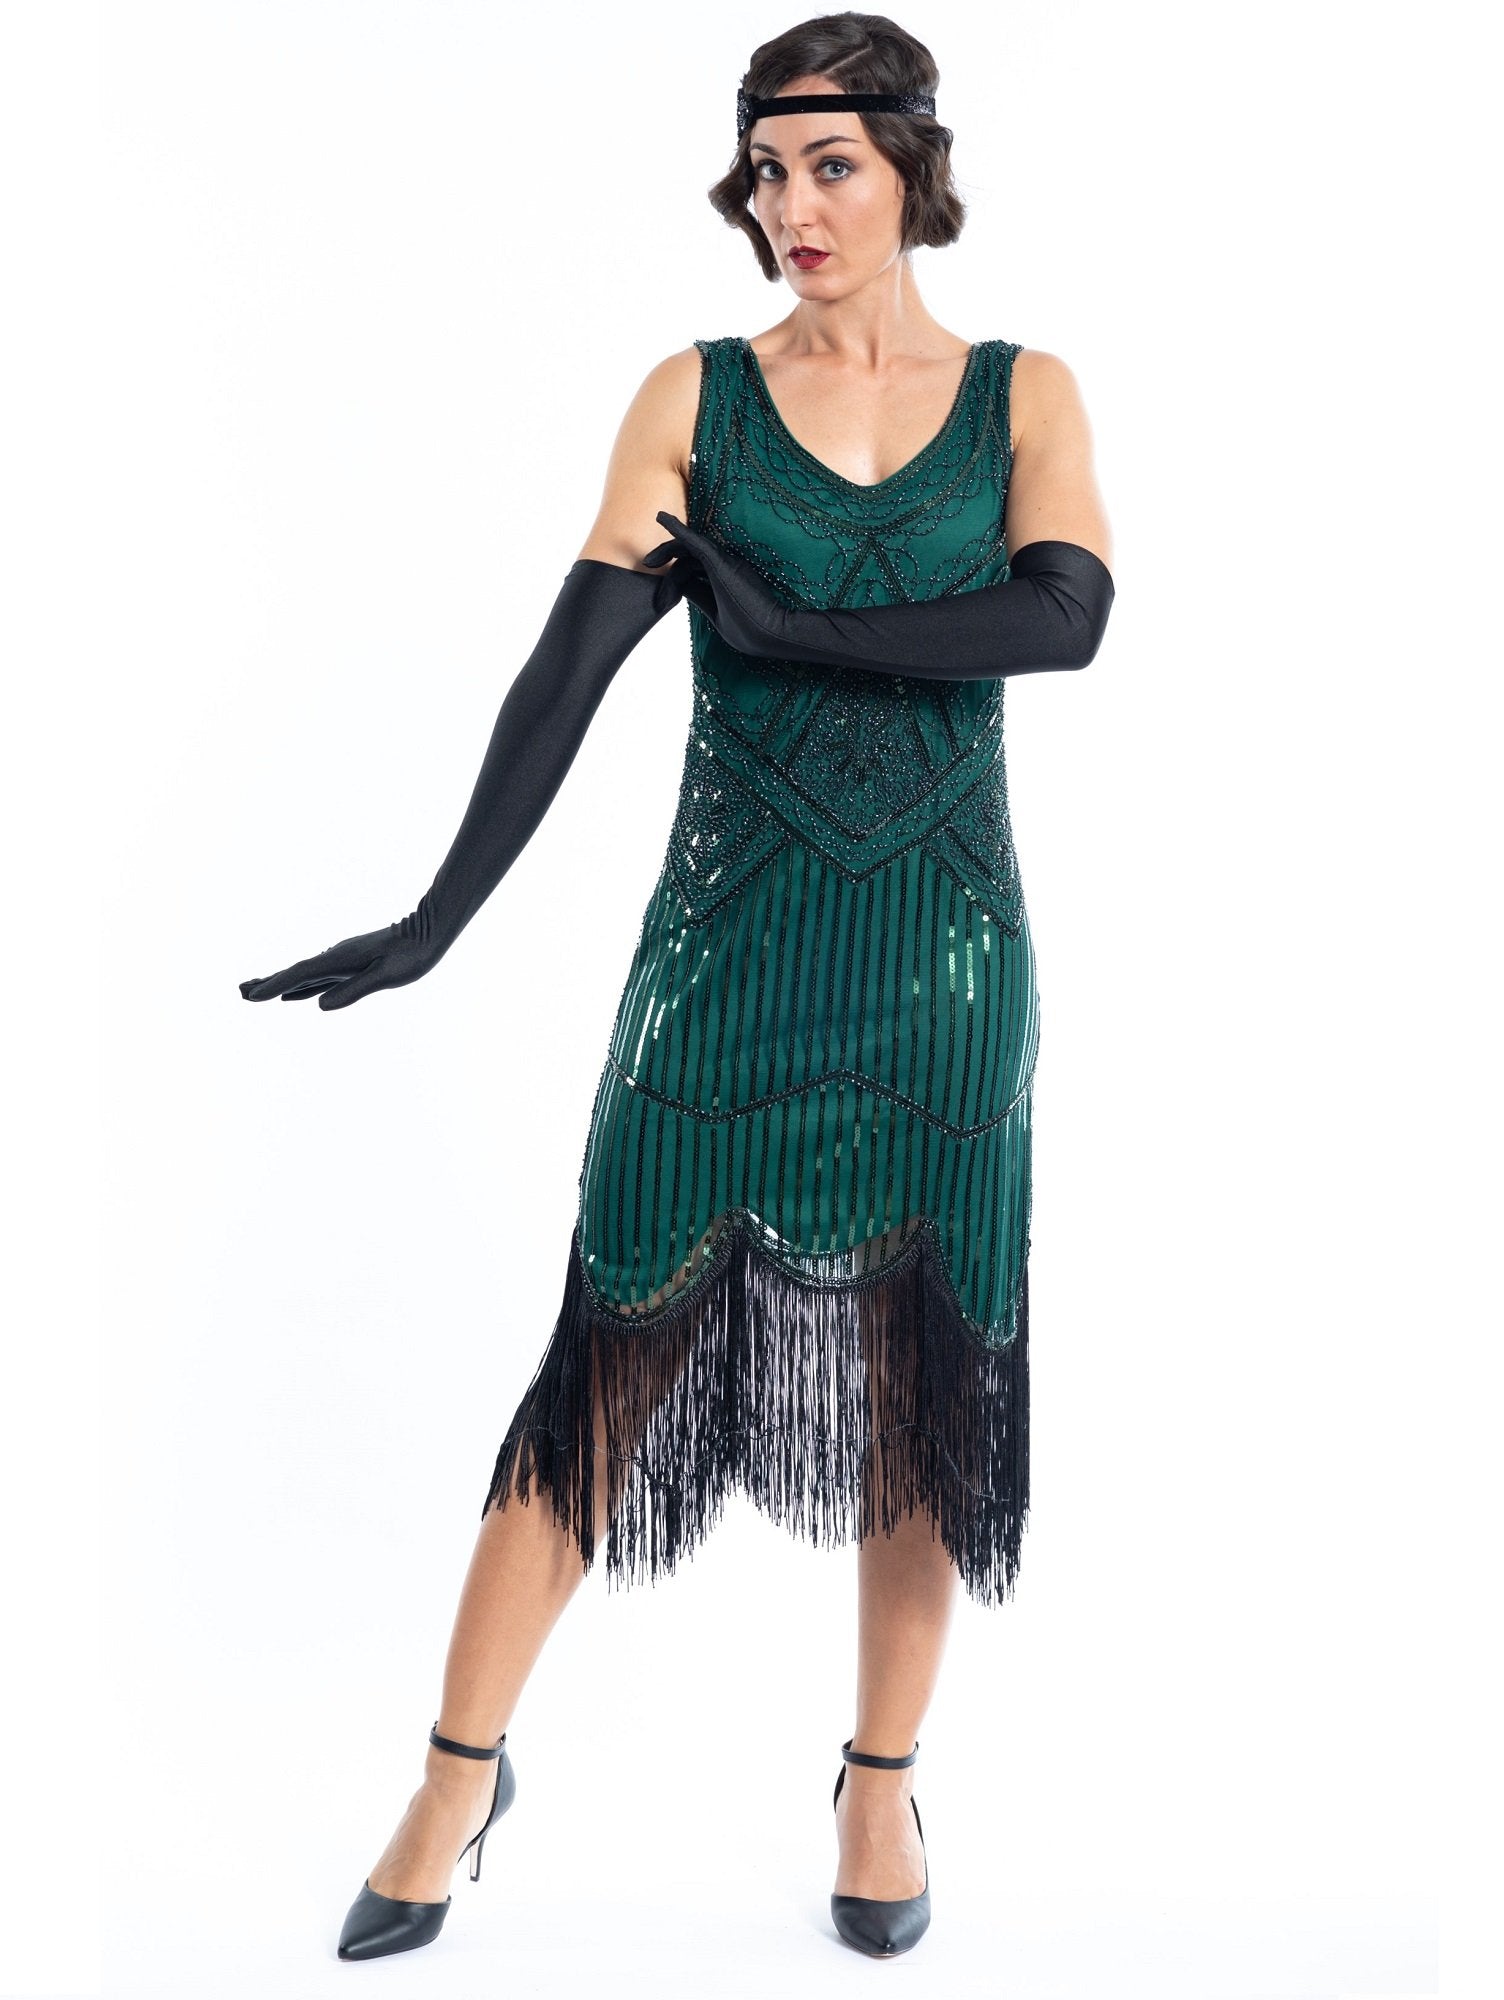 A Green Flapper Dress with black sequins, black beads and fringes